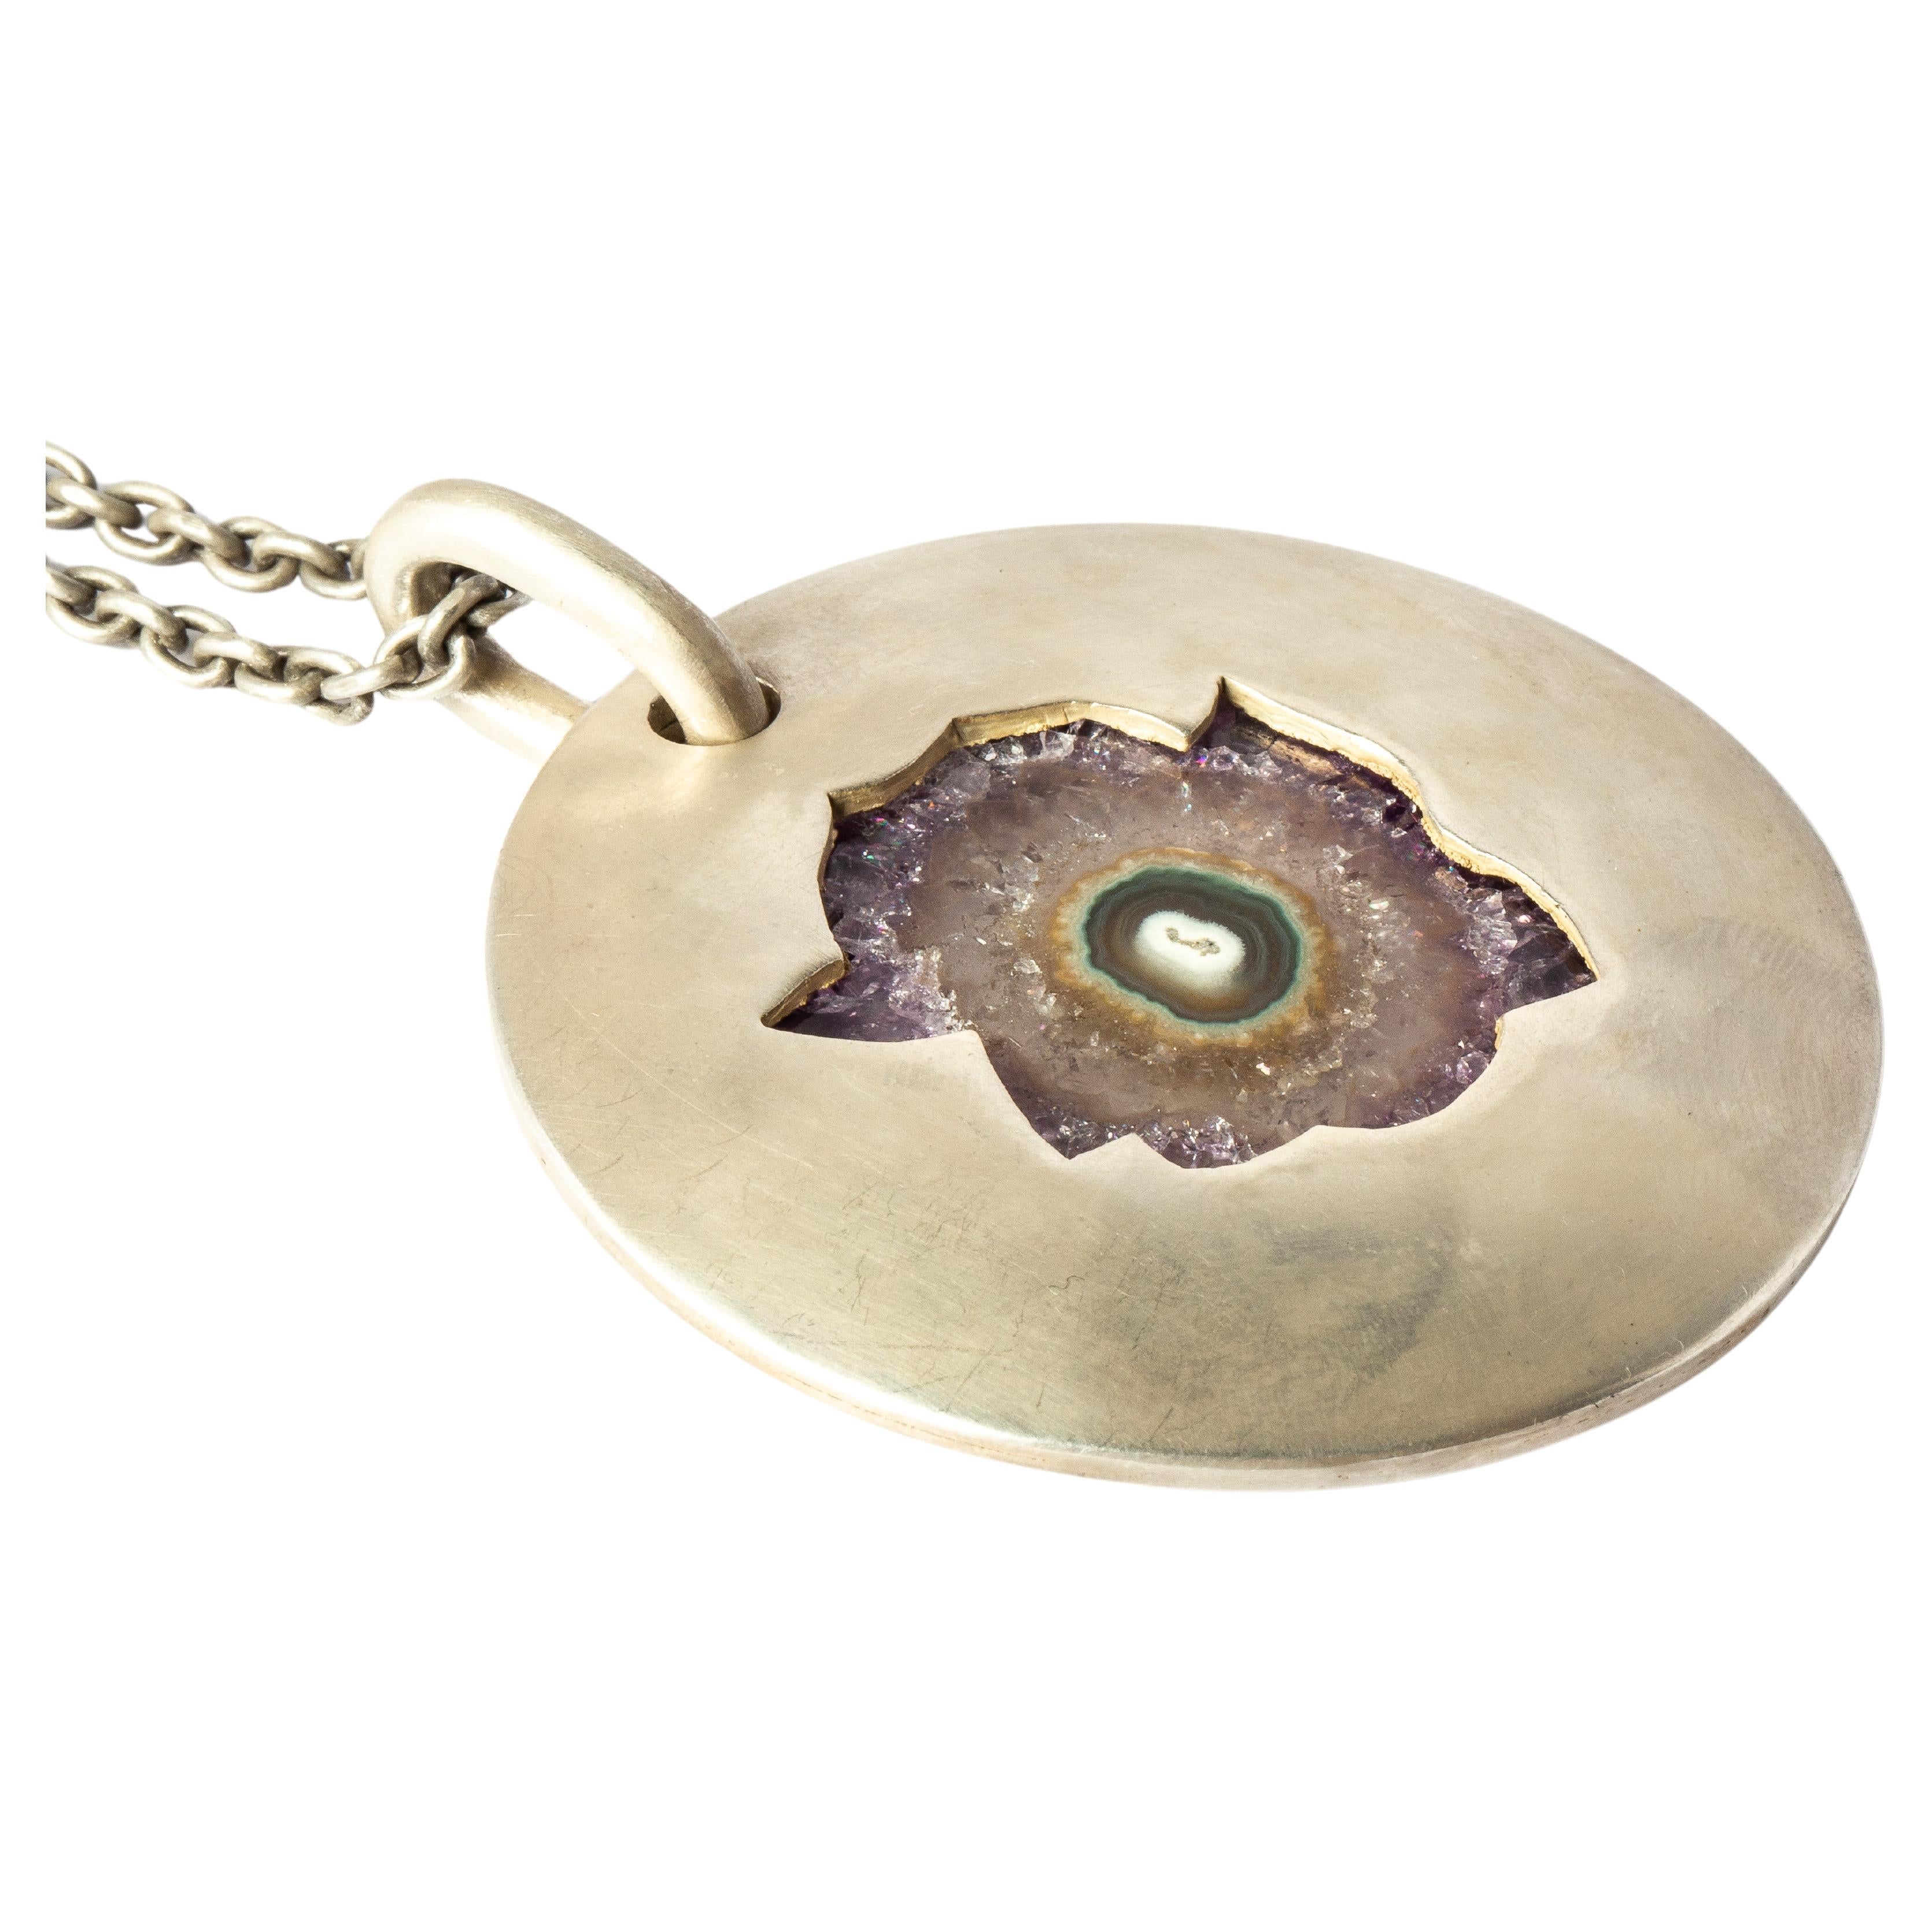 Disk Necklace (Amethyst Cross Section Stalactite, DA+AMEC) For Sale